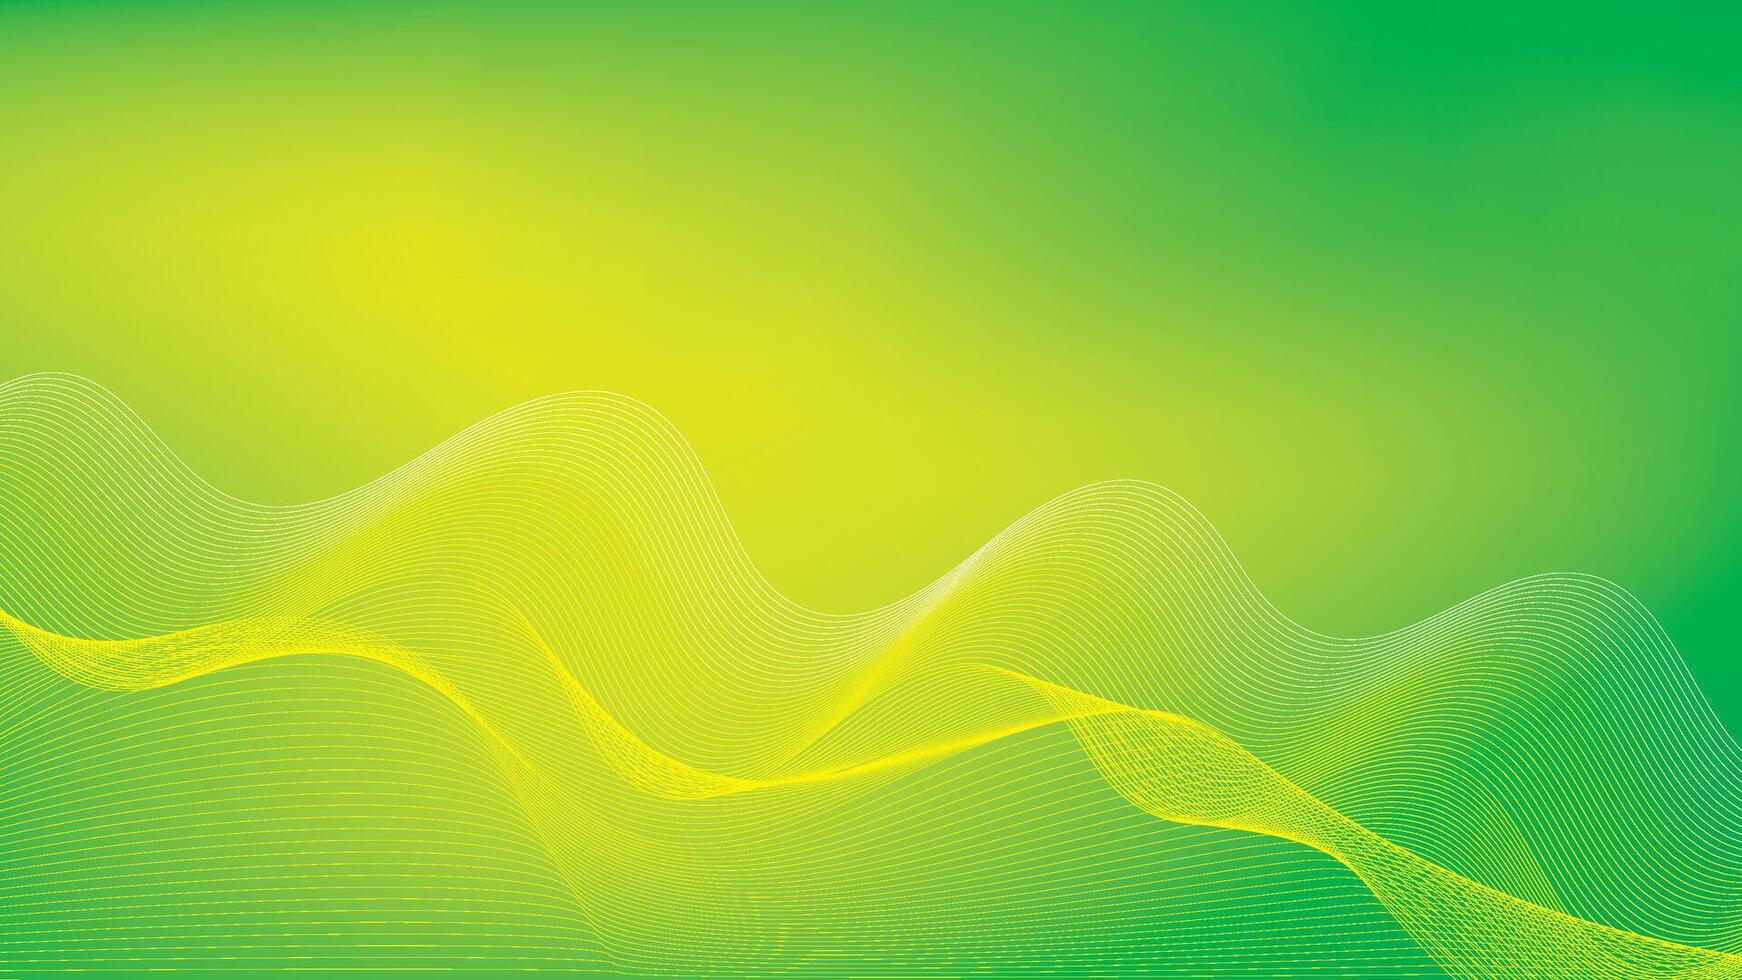 Abstract green and yellow color gradient background with wave pattern. Vector illustration.